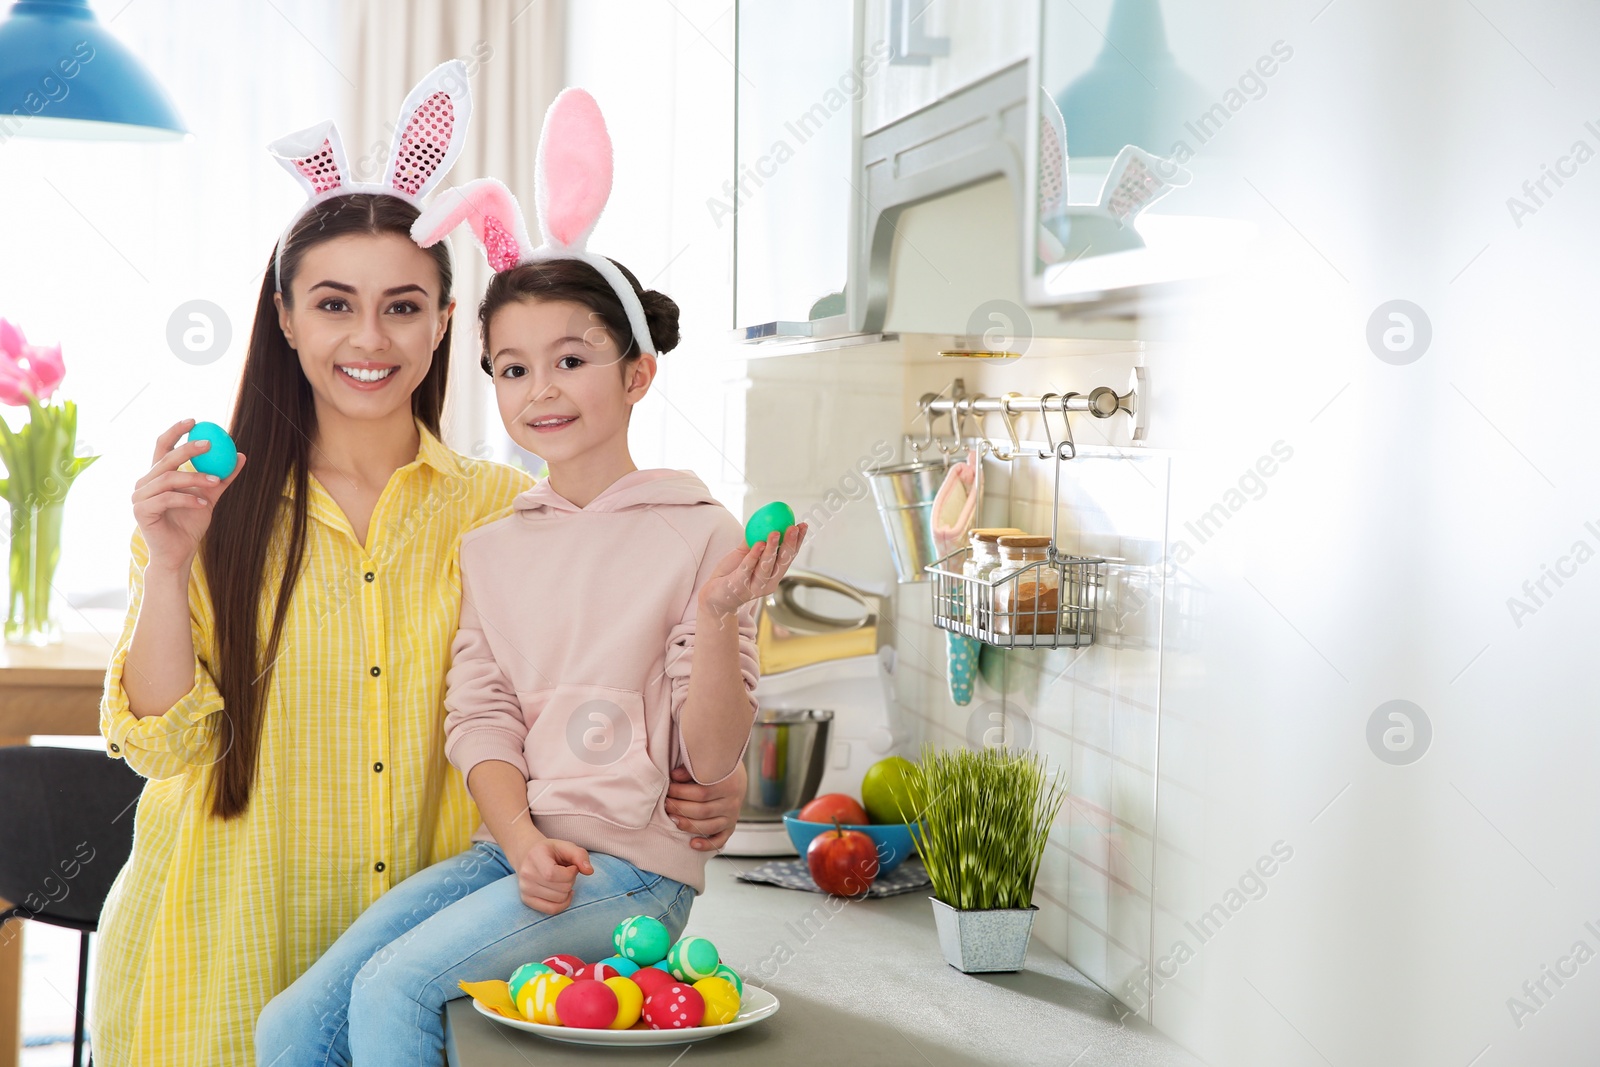 Photo of Mother and daughter with bunny ears headbands and painted Easter eggs in kitchen, space for text